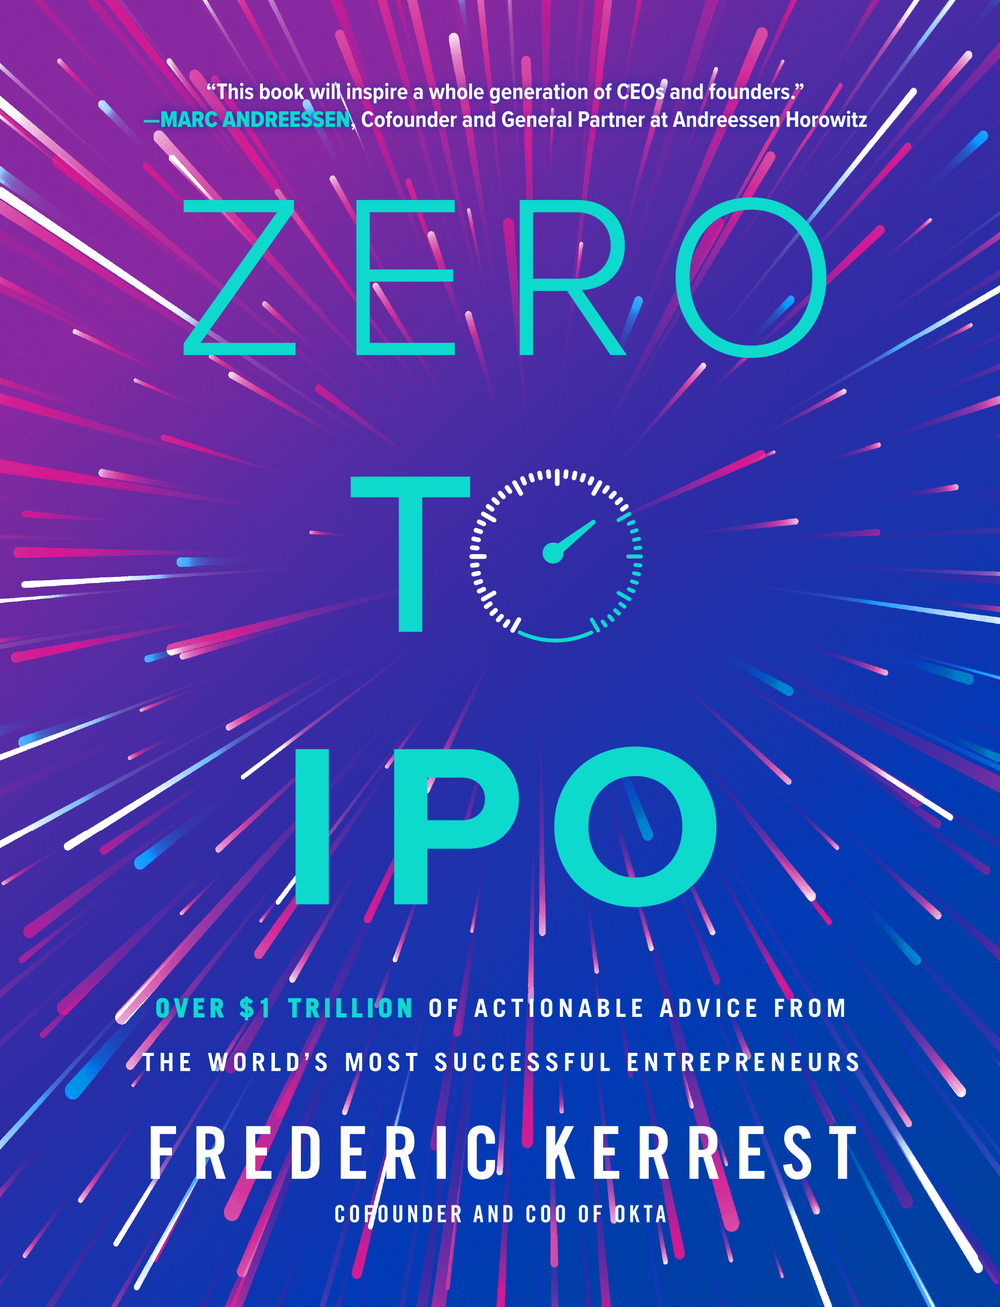 Zero to Ipo Over $1 Trillion of Actionable Advice from the World's Most Successful Entrepreneurs